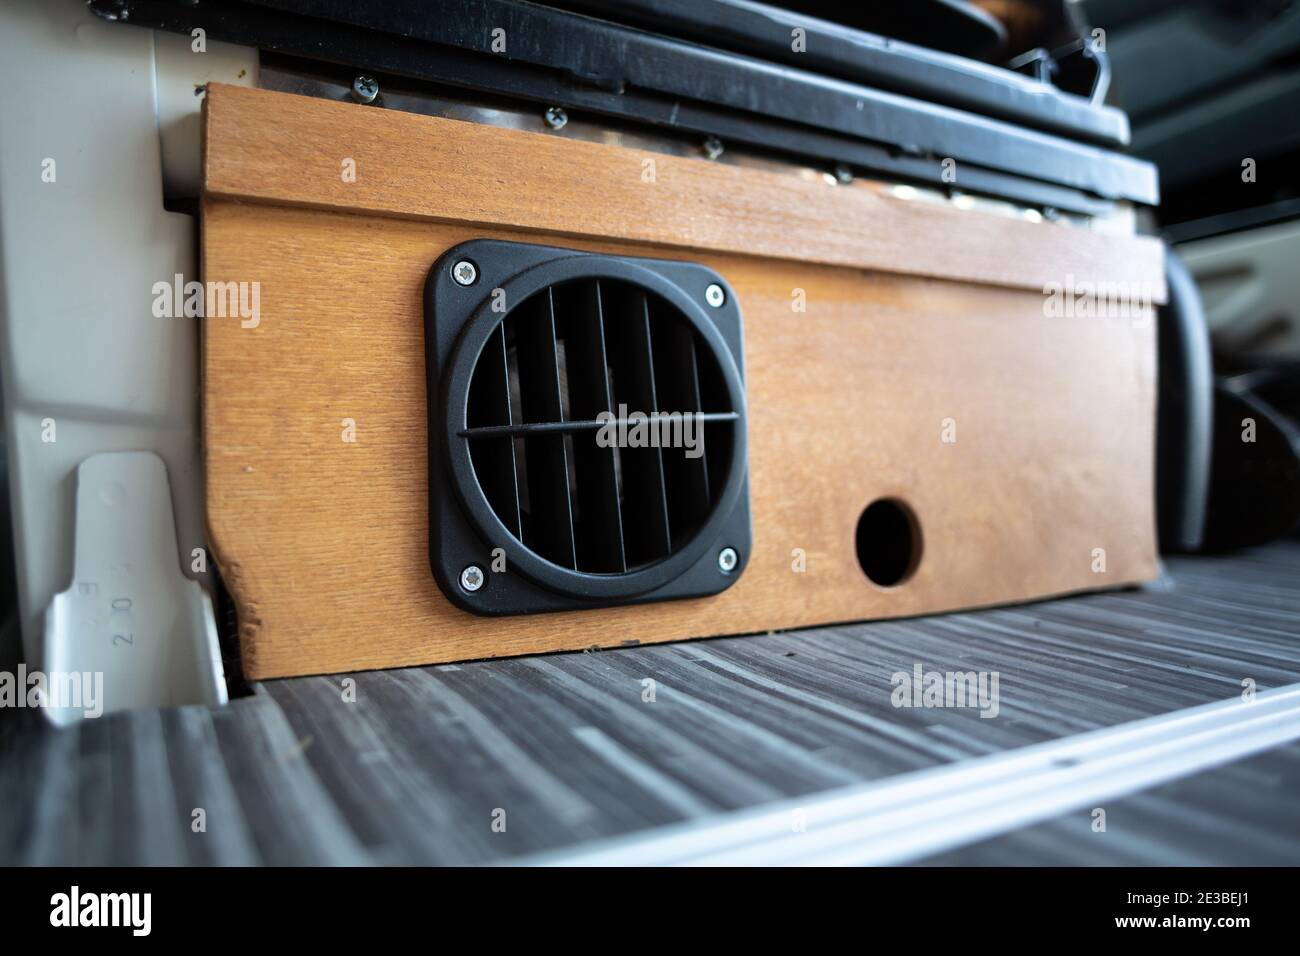 Air outlet vent of a heater in a camper van Stock Photo